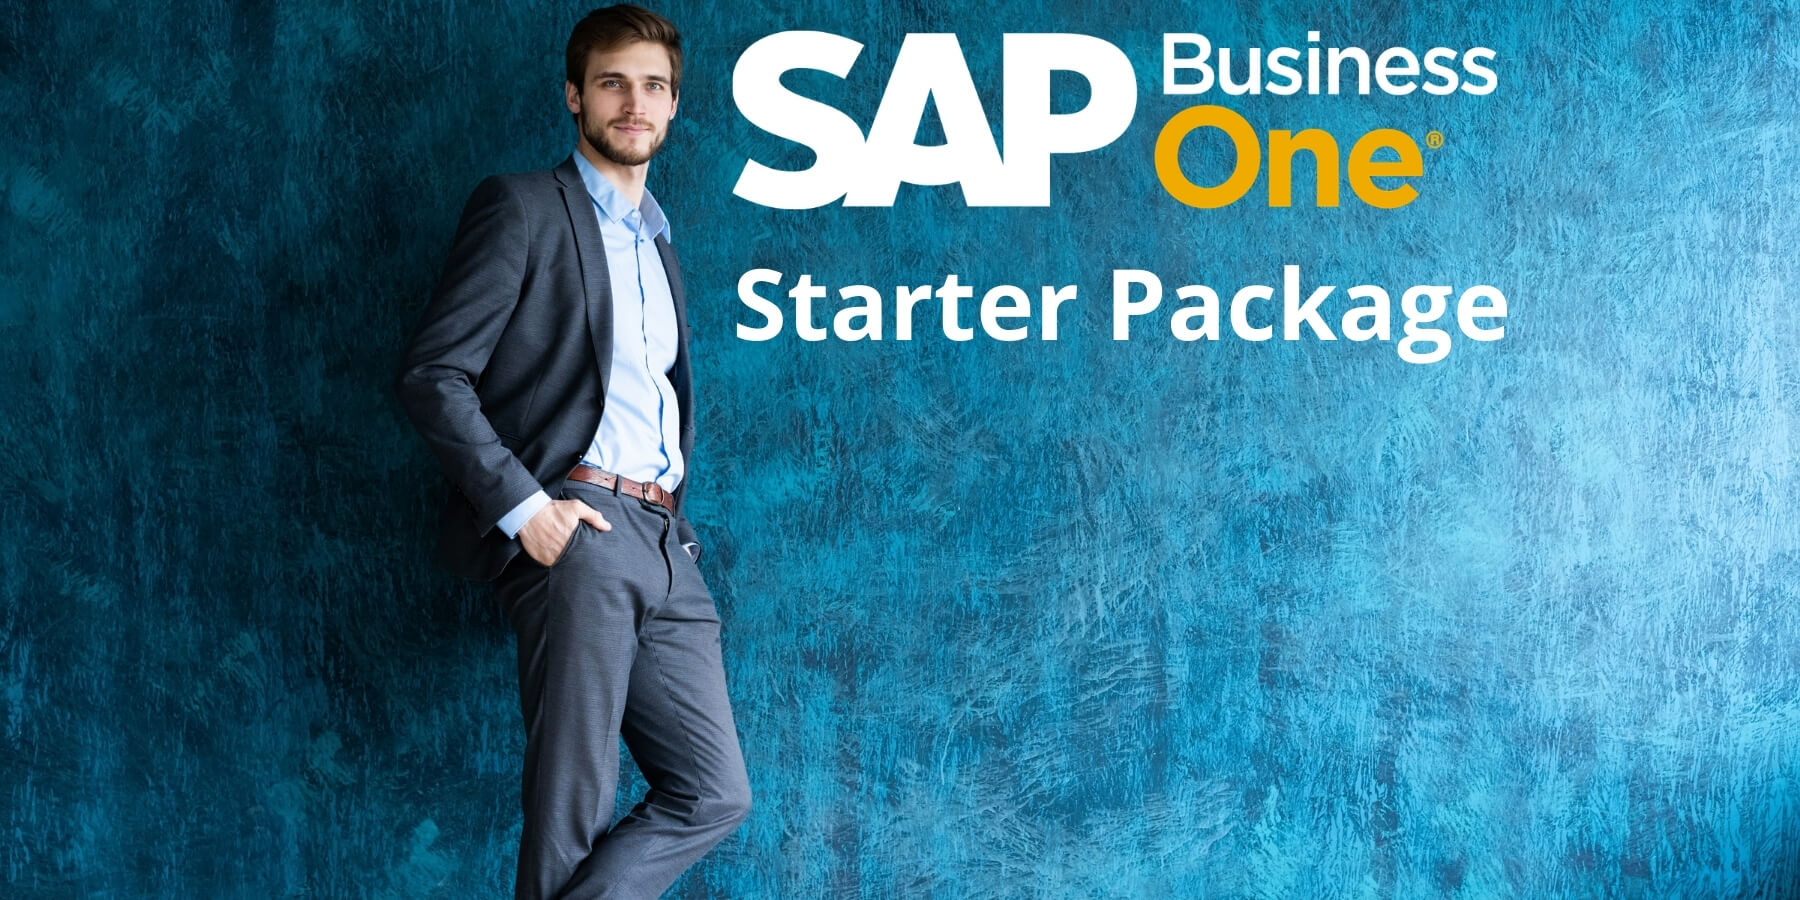 sap business one starter package